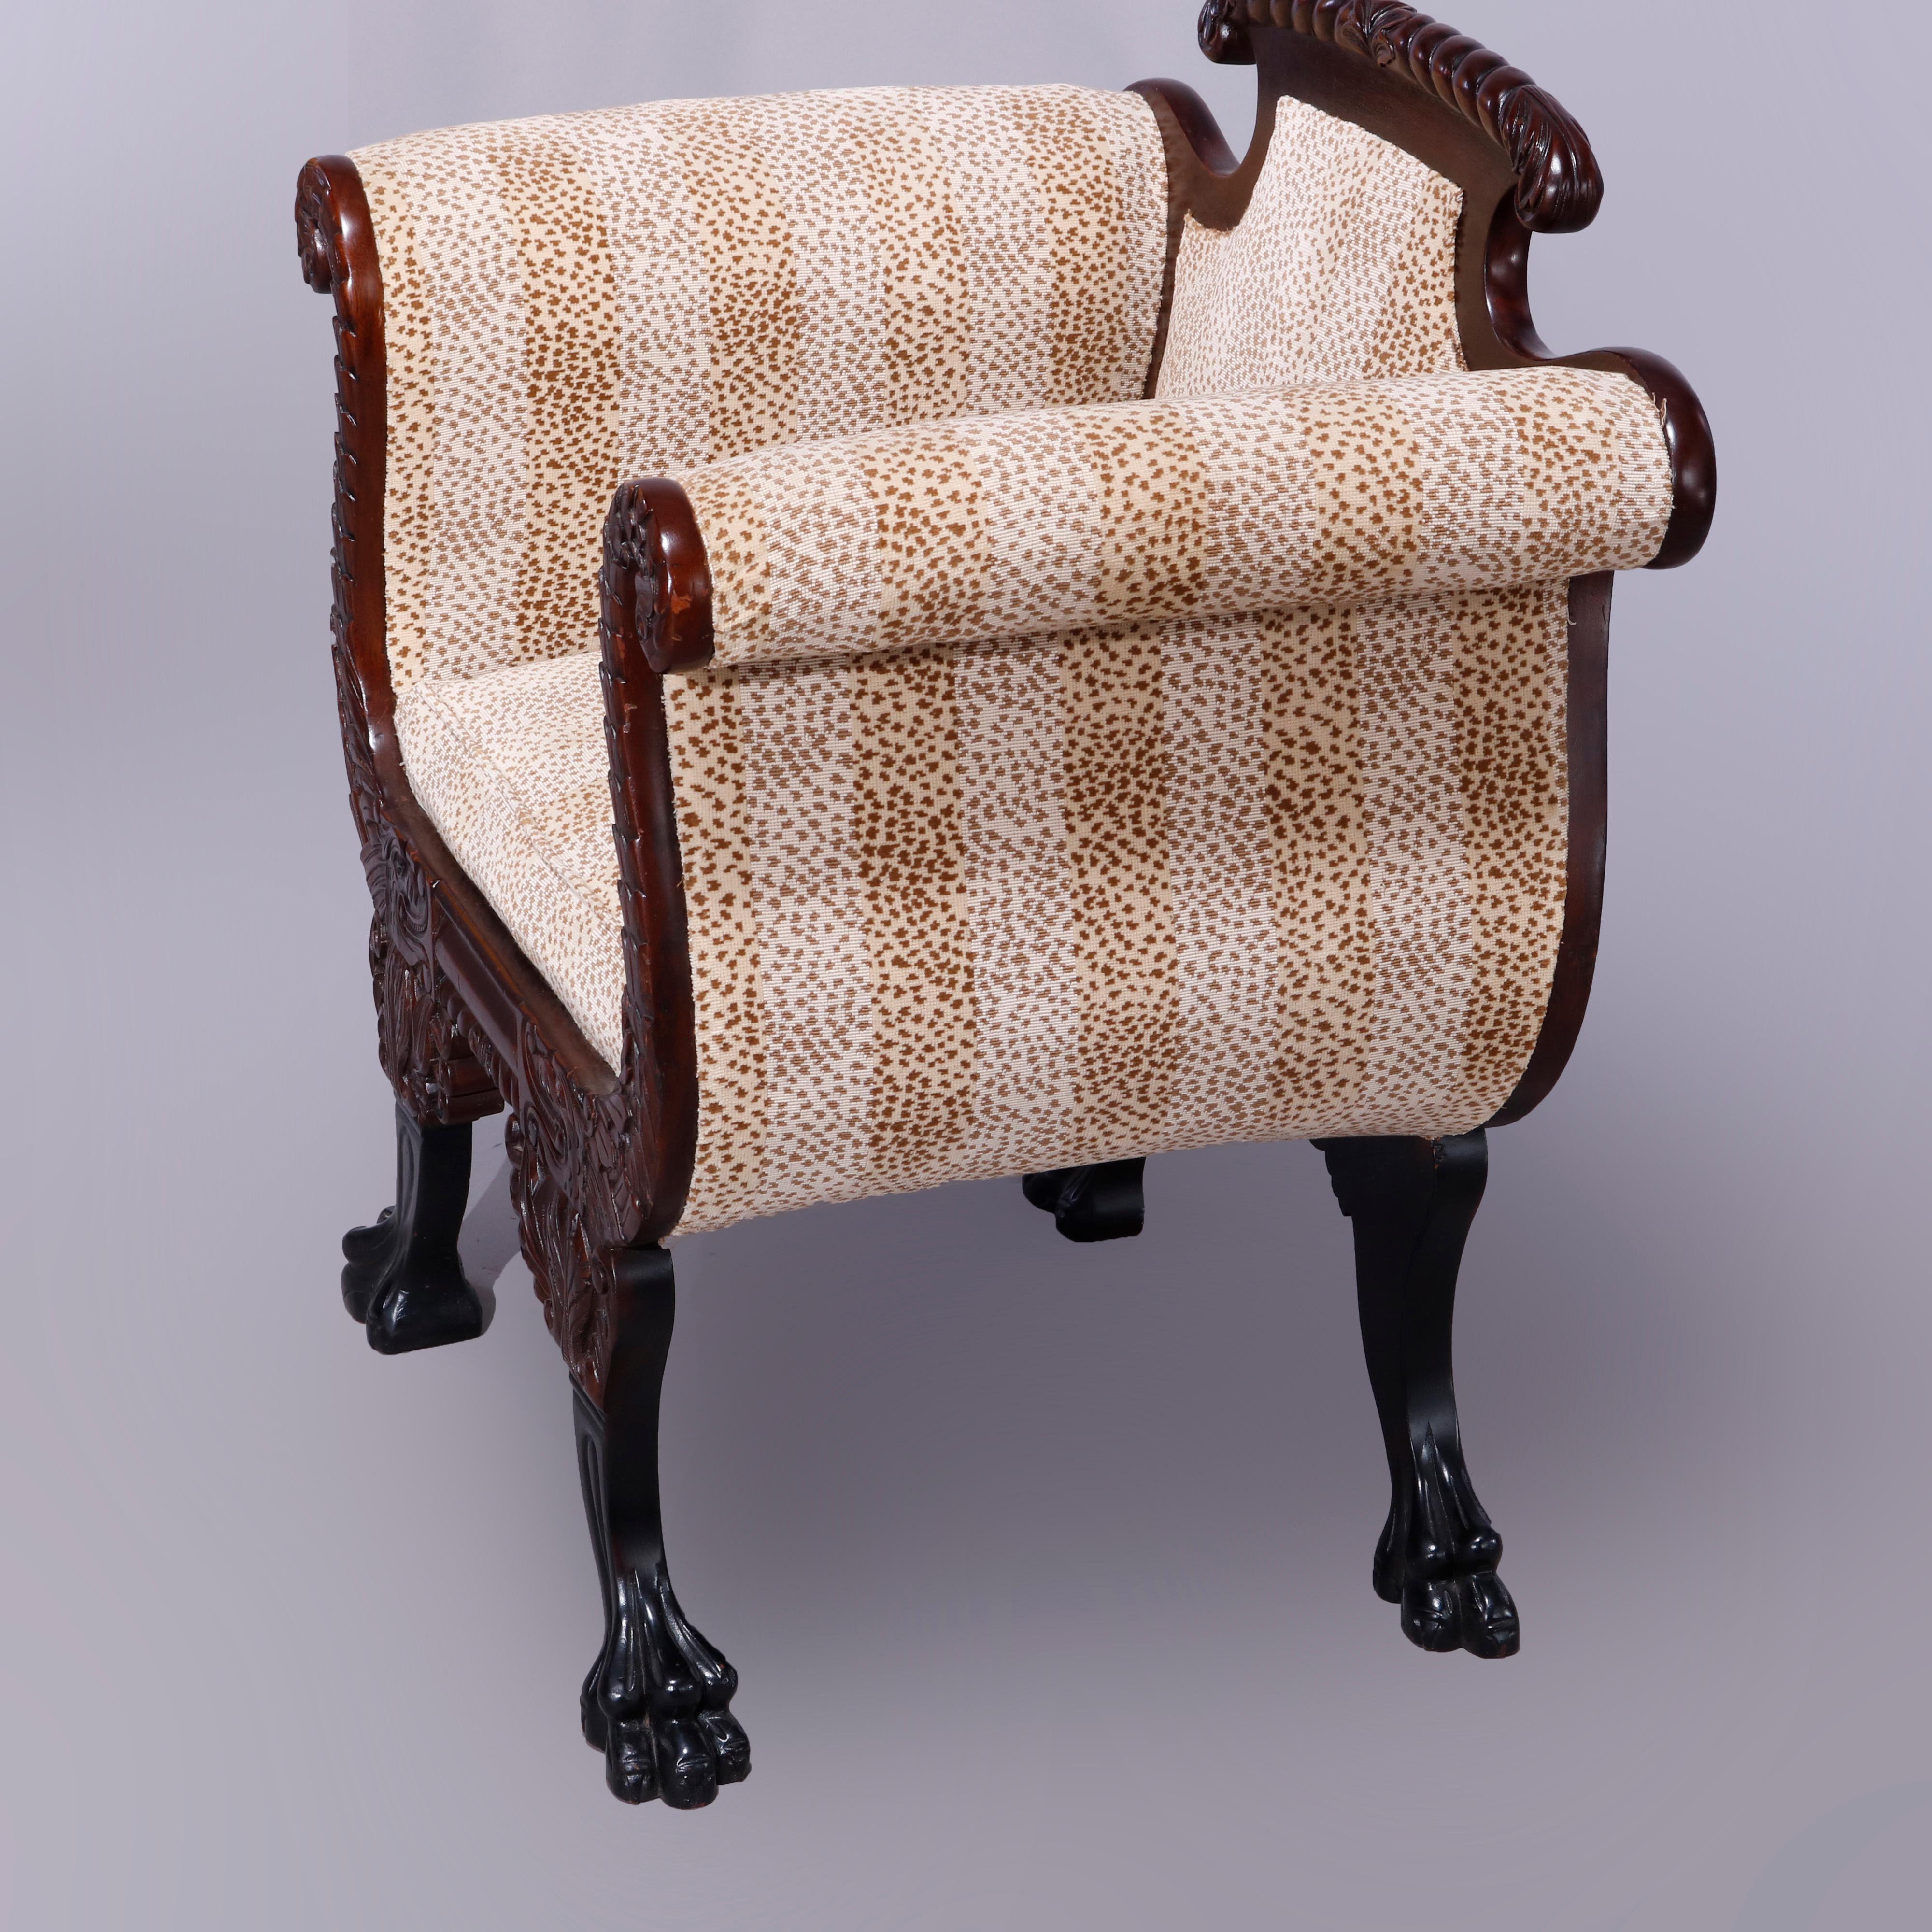 An antique American Empire neoclassical style upholstered occasional armchair offers carved mahogany frame in acanthus form with shaped back and scroll form arms raised on legs with carved paw and claw feet, upholstered in striped animal print